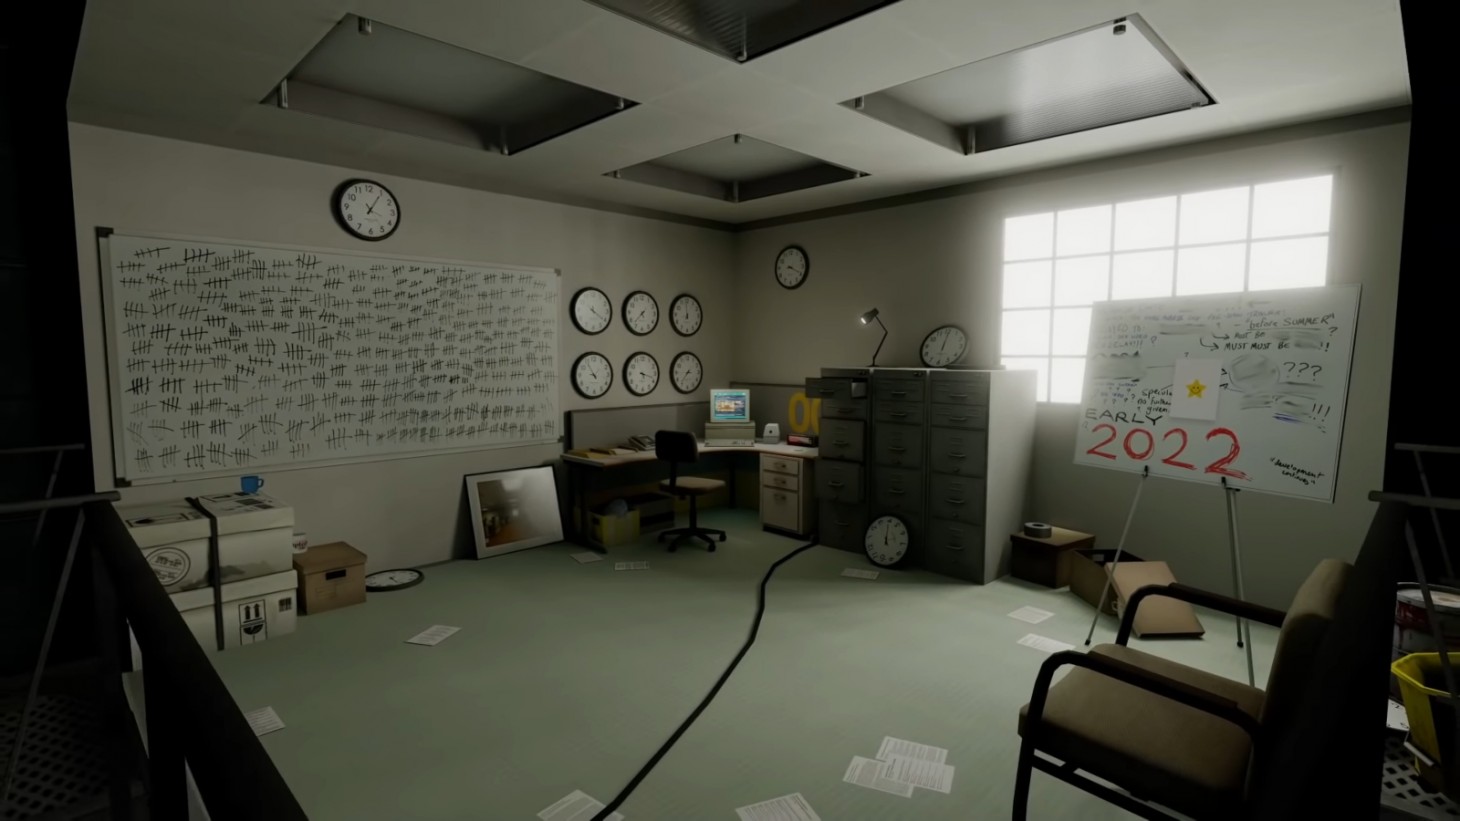 Parable ultra deluxe. Stanley Parable Ultra Deluxe Стэнли. The Stanley Parable: Ultra Deluxe. The Stanley Parable Ultra Deluxe v.1.05 (2022). Ведро the Stanley Parable.